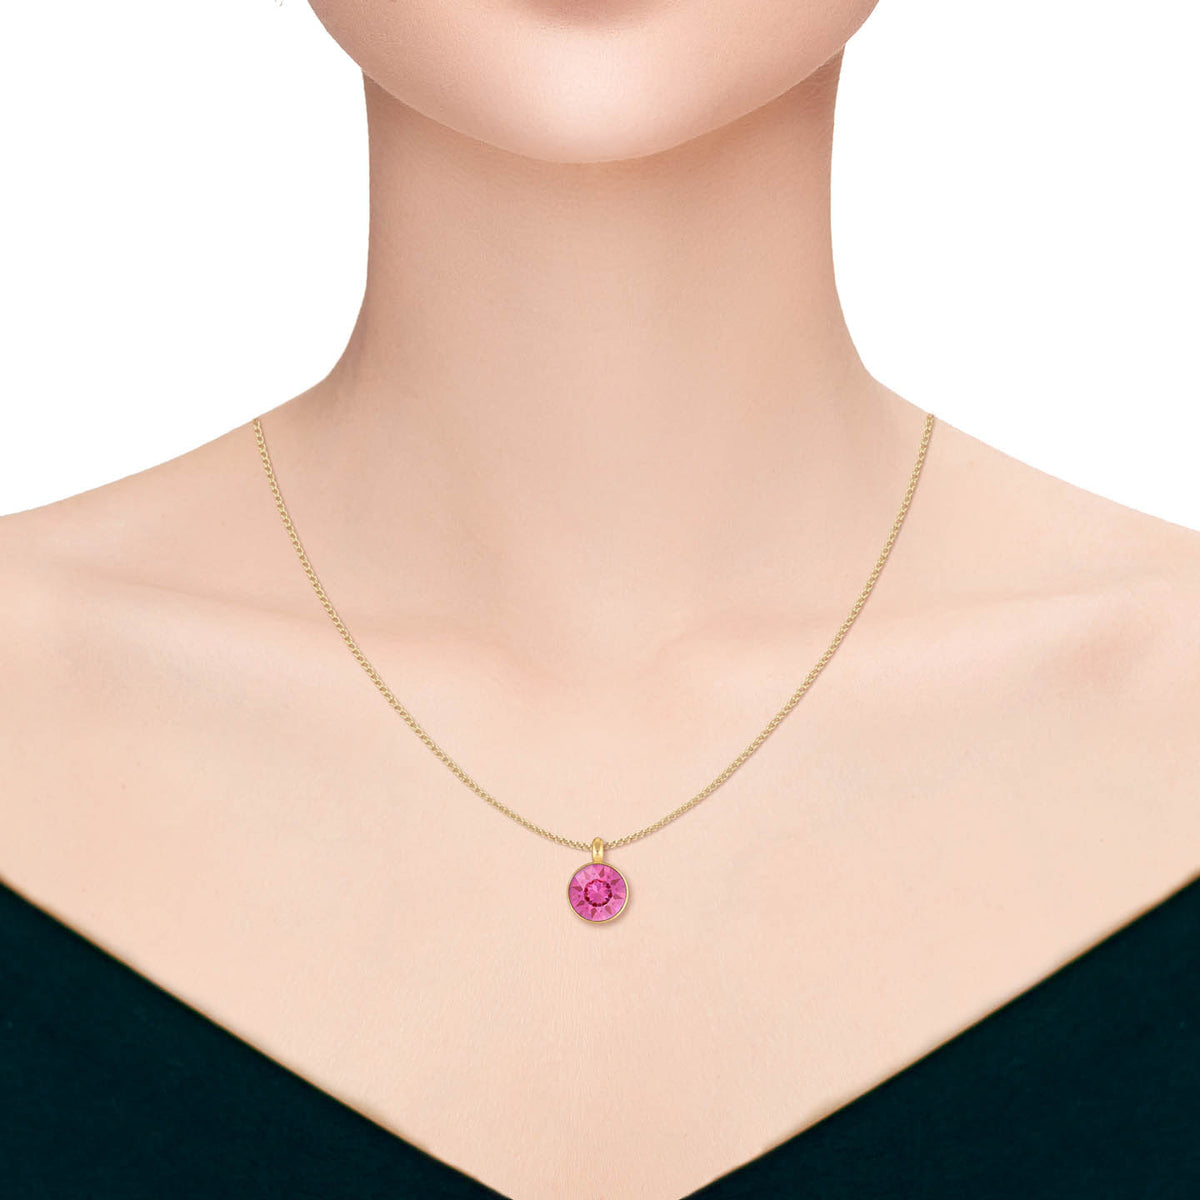 Bella Pendant Necklace with Pink Rose Round Crystals from Swarovski Gold Plated - Ed Heart